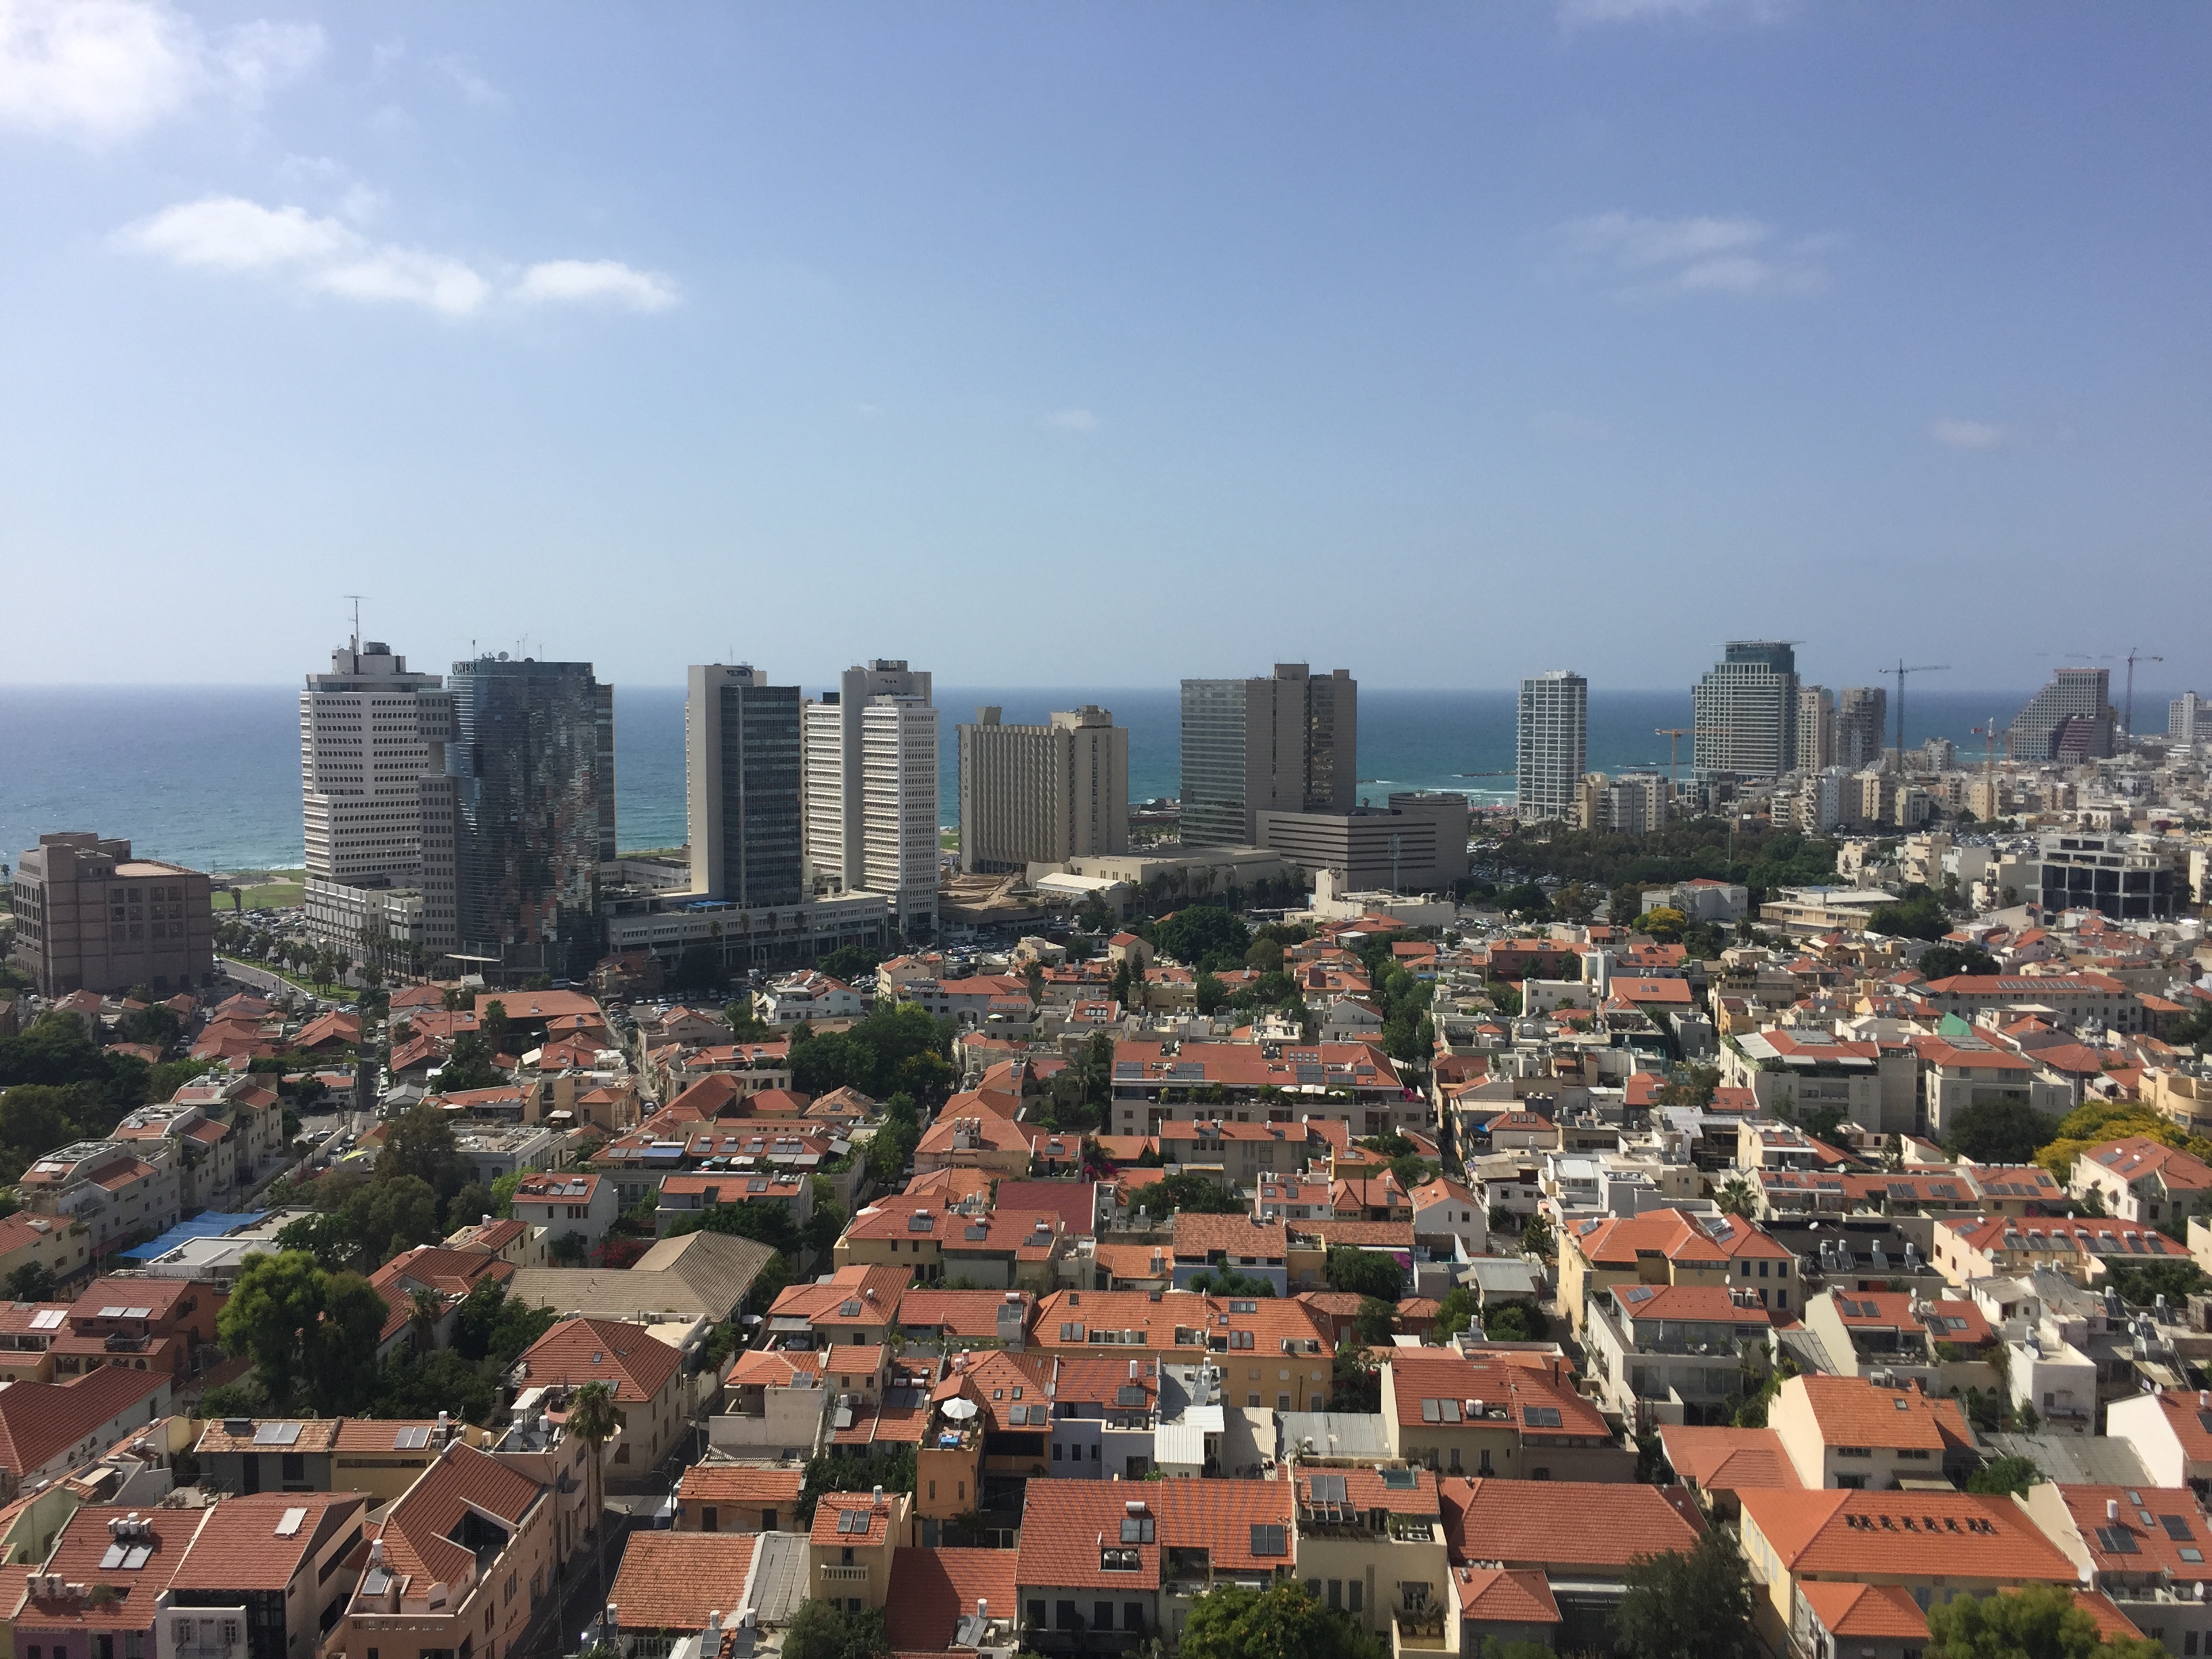 Tel Aviv Real Estate News | Israeli Property Prices Continue to Rise